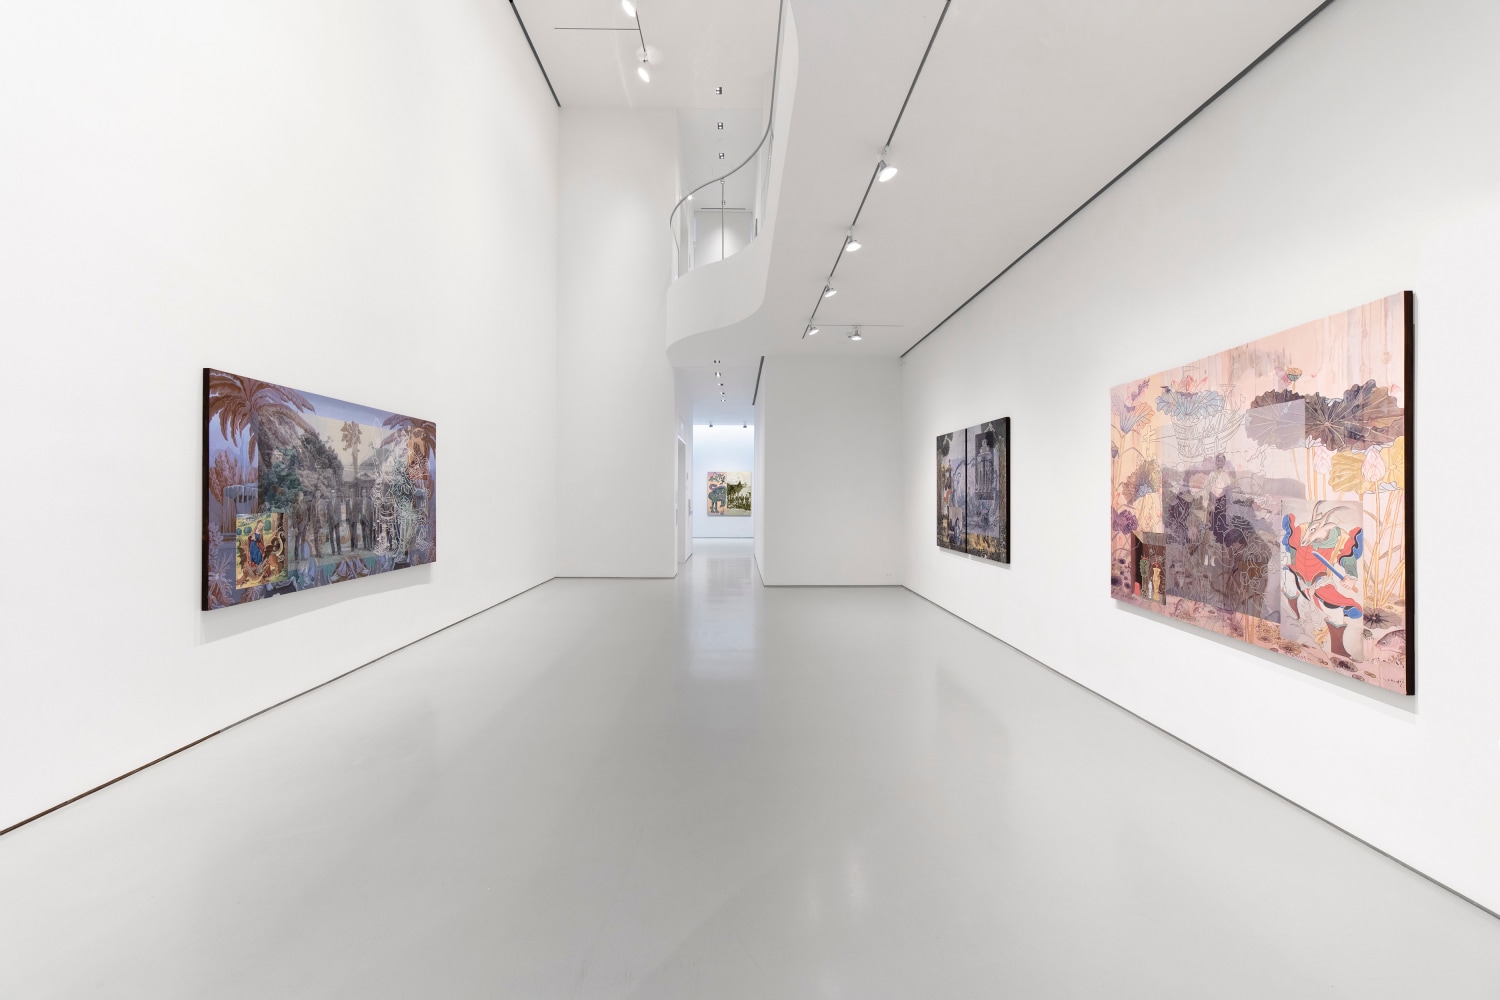 Three figurative paintings placed on separate parallel walls converging towards a fourth at the end of the space